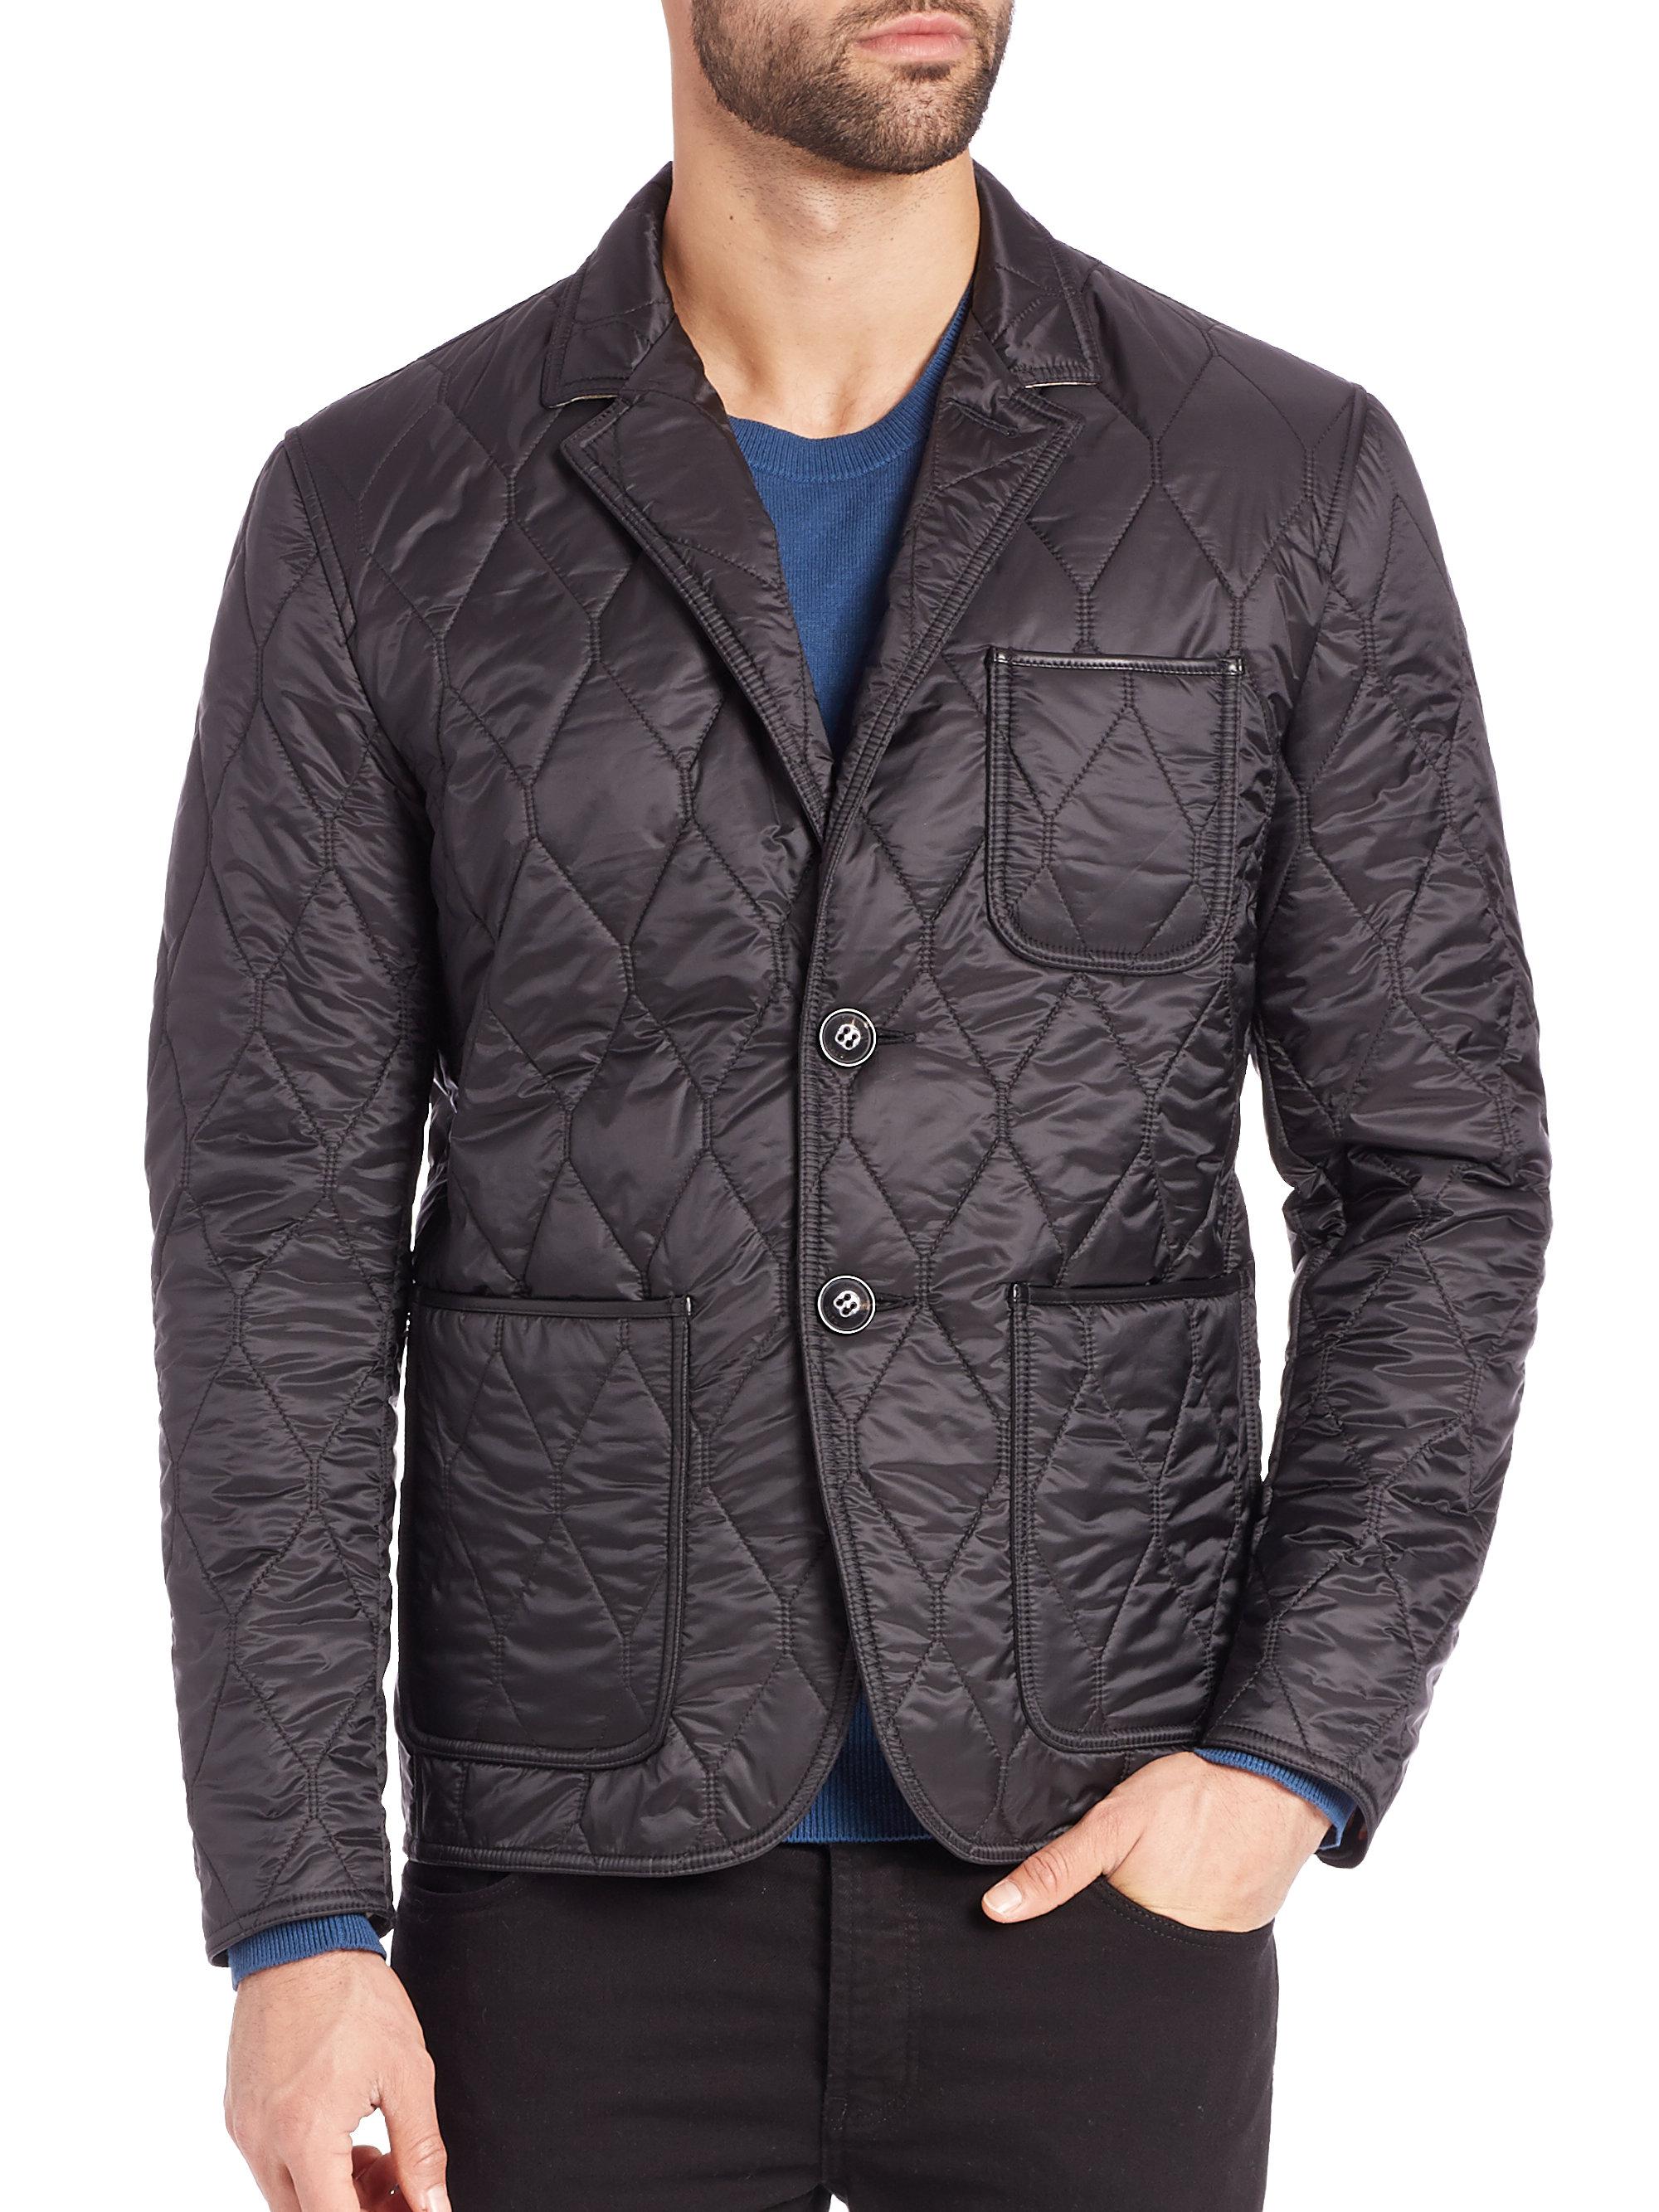 Lyst - Burberry Gillington Quilted Jacket in Black for Men